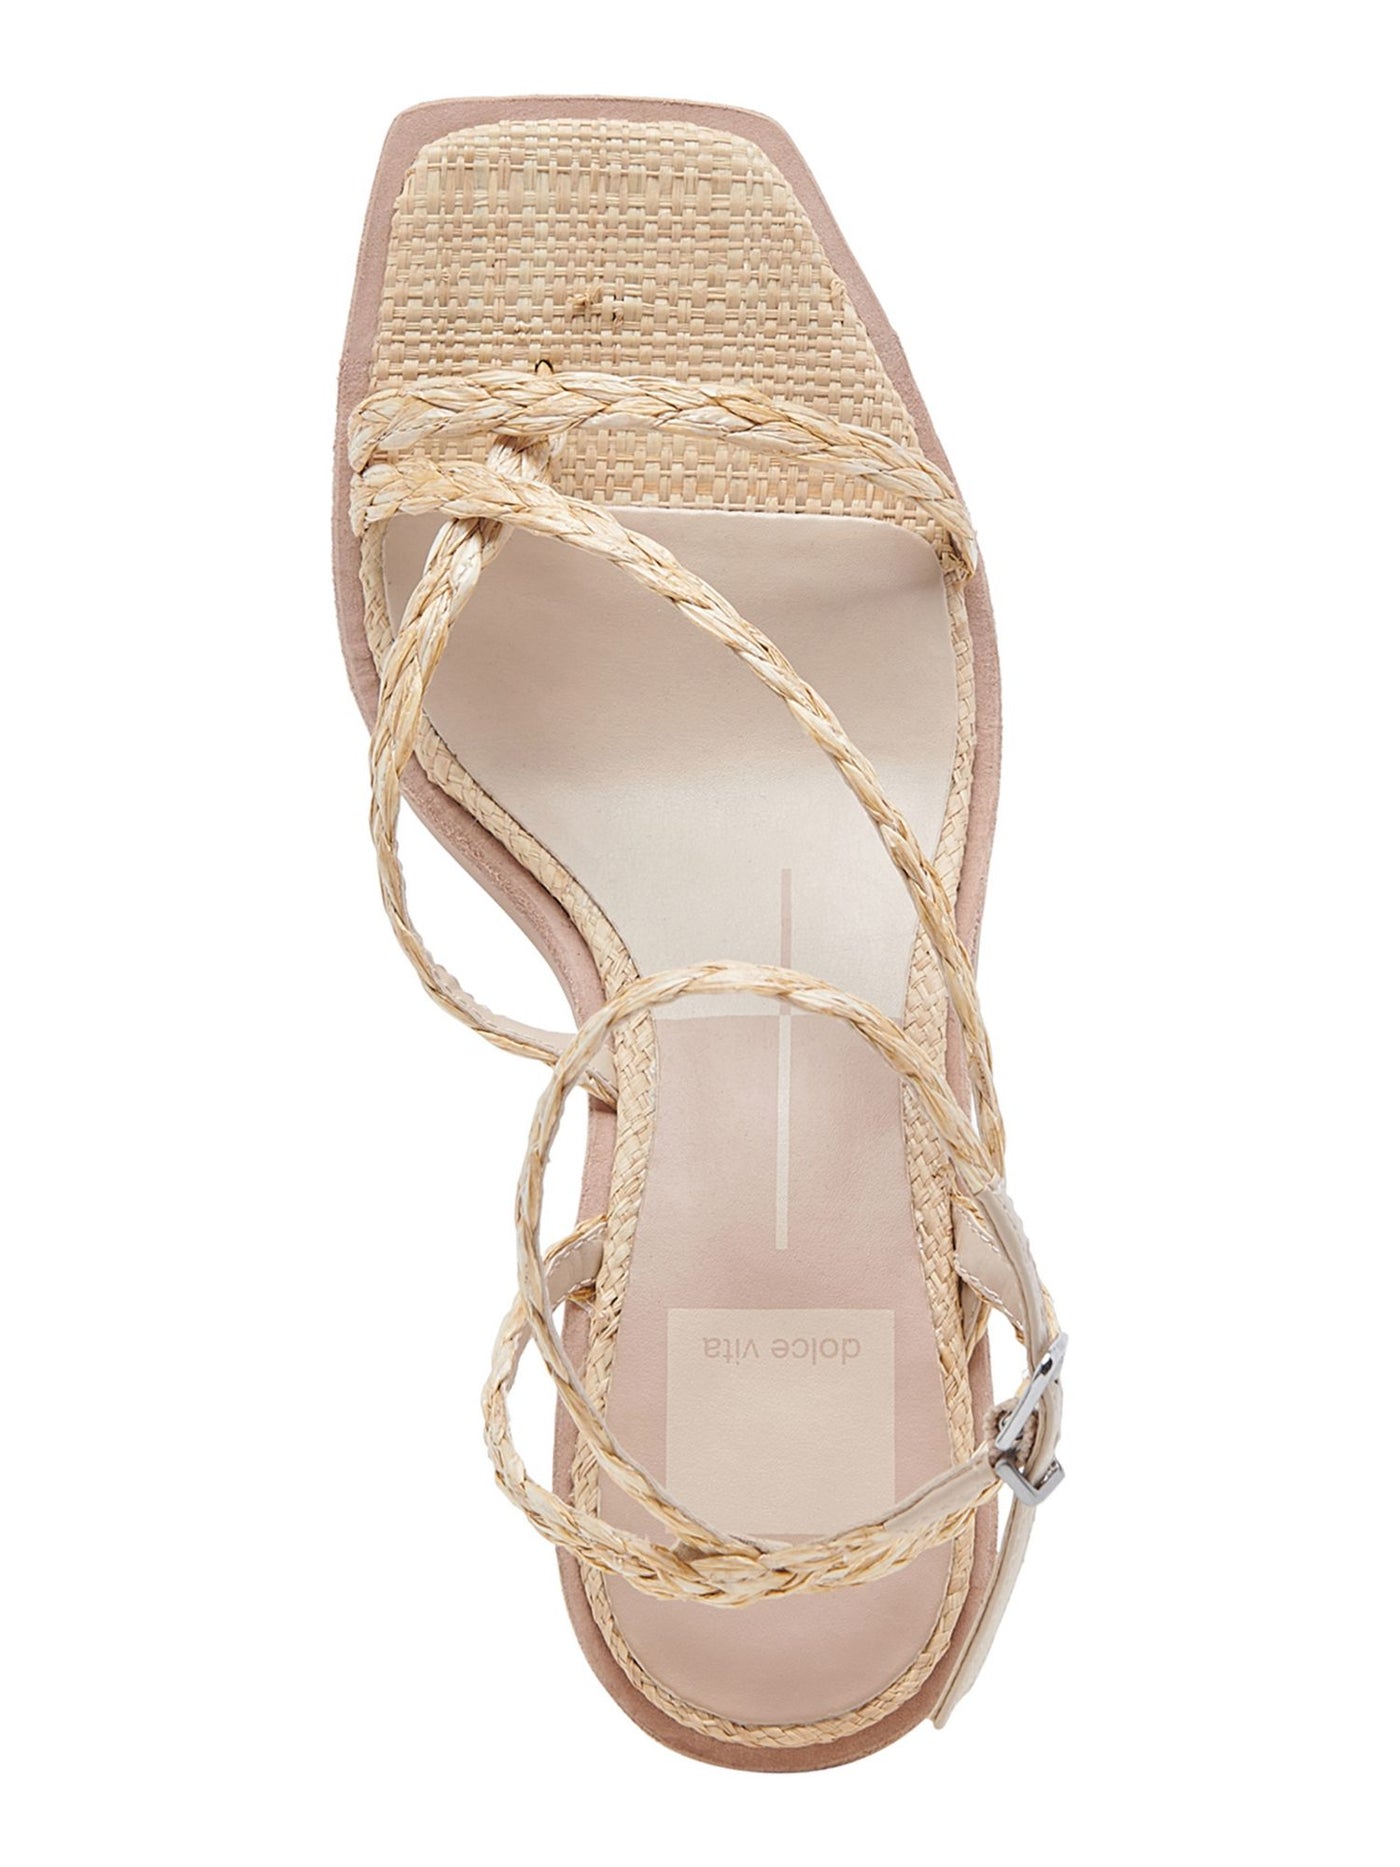 DOLCE VITA Womens Beige Toe Strap Padded Ankle Strap Woven Gemini Square Toe Wedge Buckle Espadrille Shoes 5